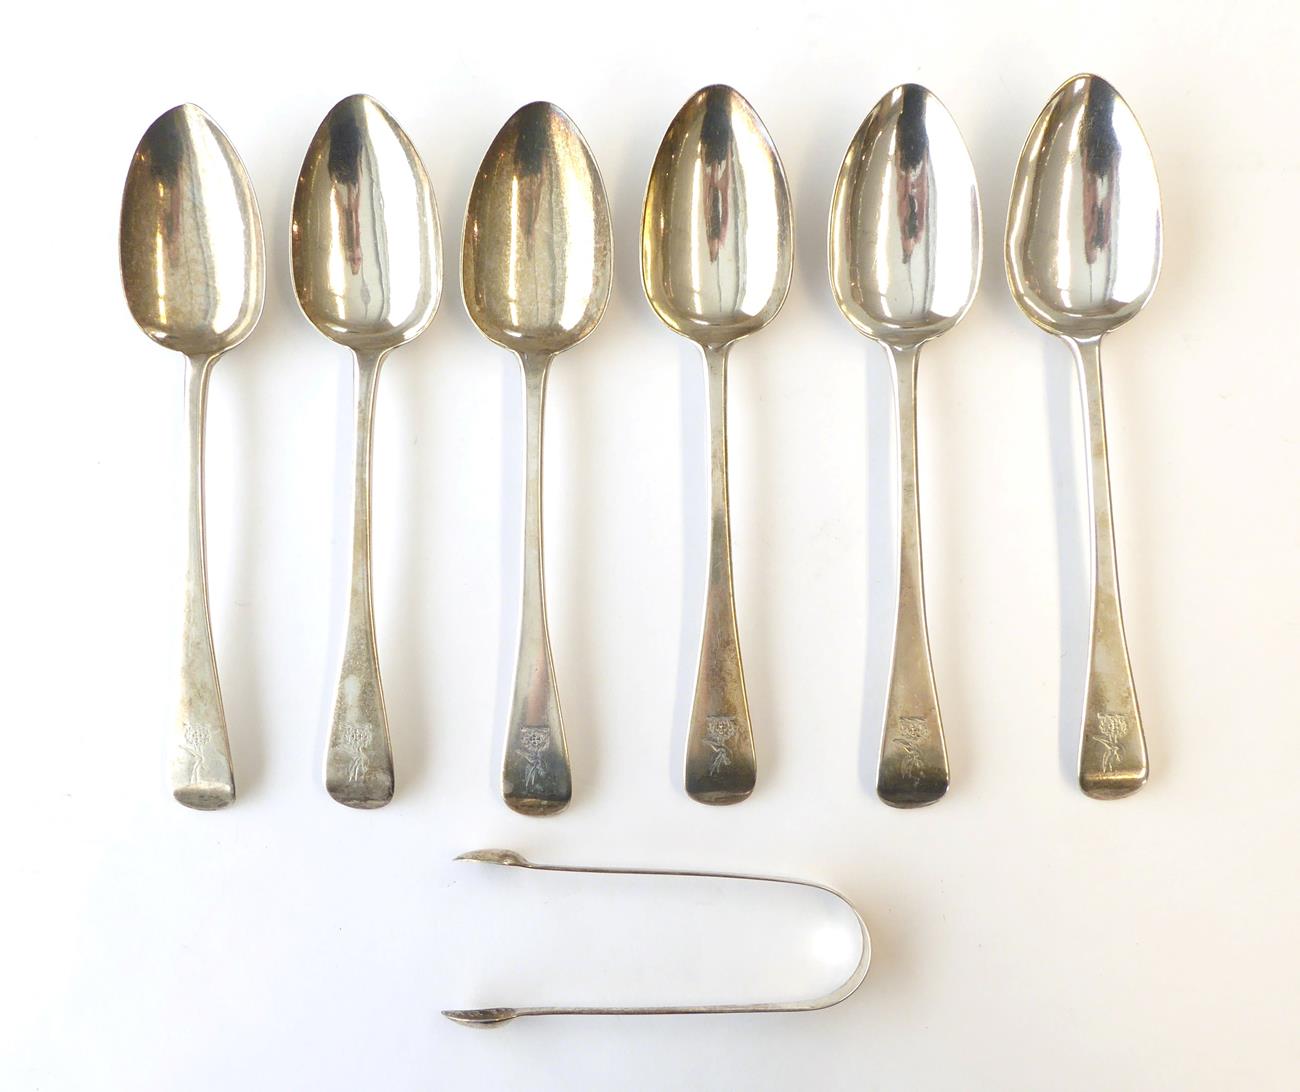 A Set of Six George IV Silver Table-Spoons and a Pair of George III Silver Sugar-Tongs, the table-